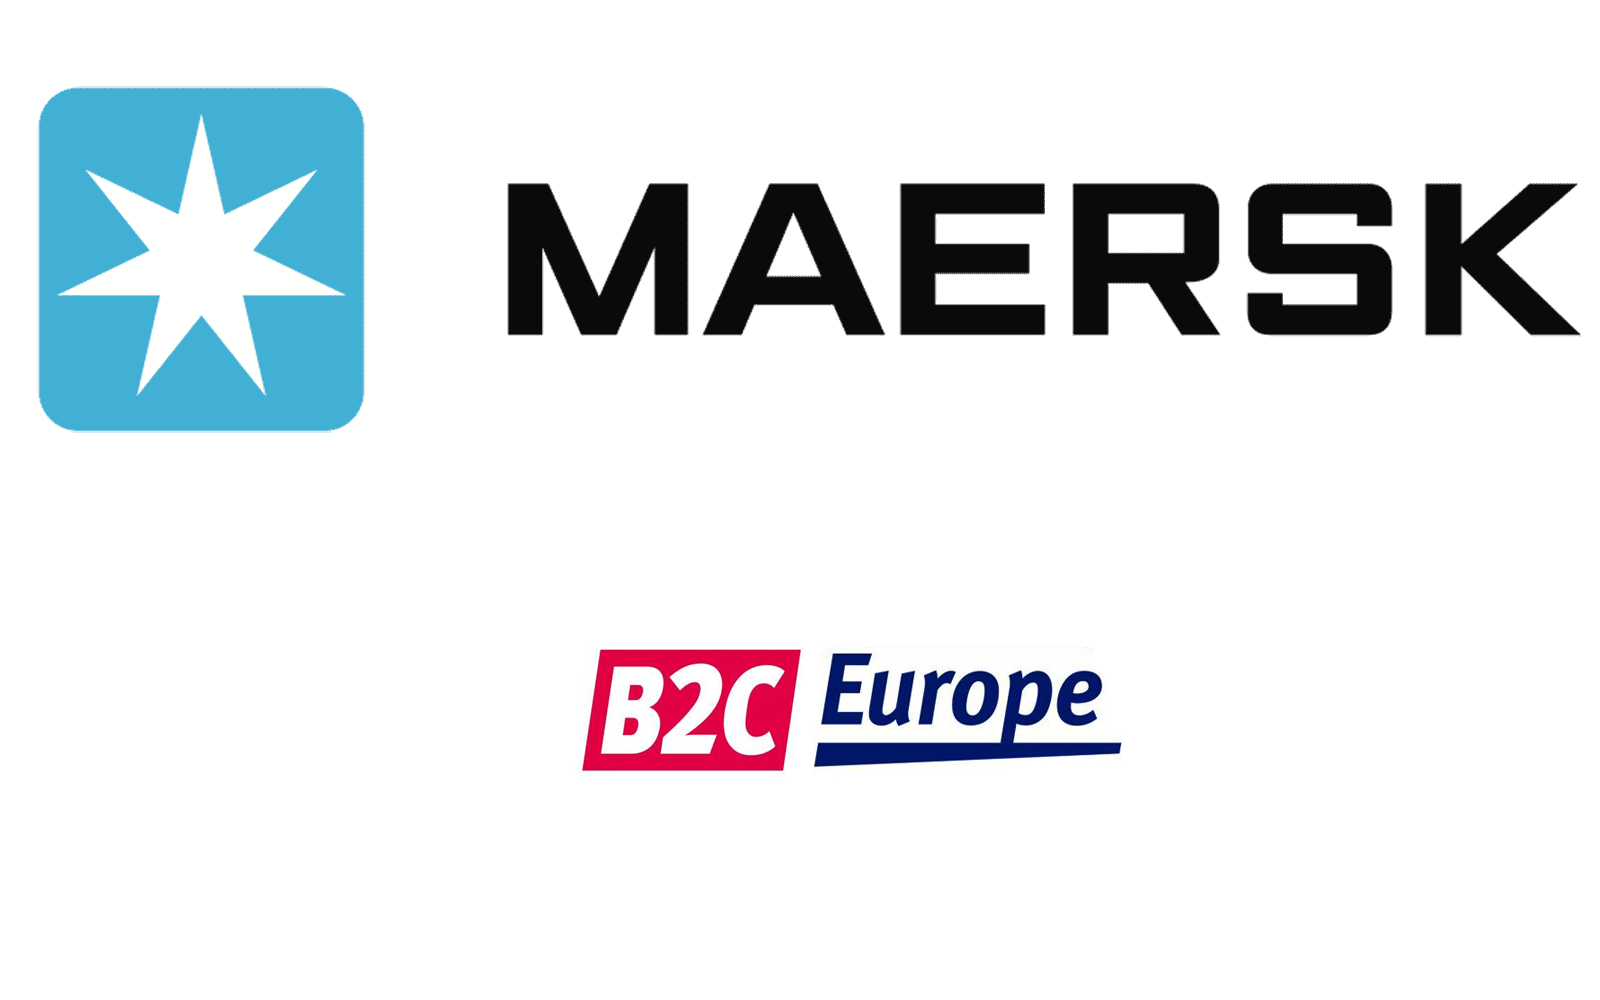 Maersk buys B2C Europe for $86m